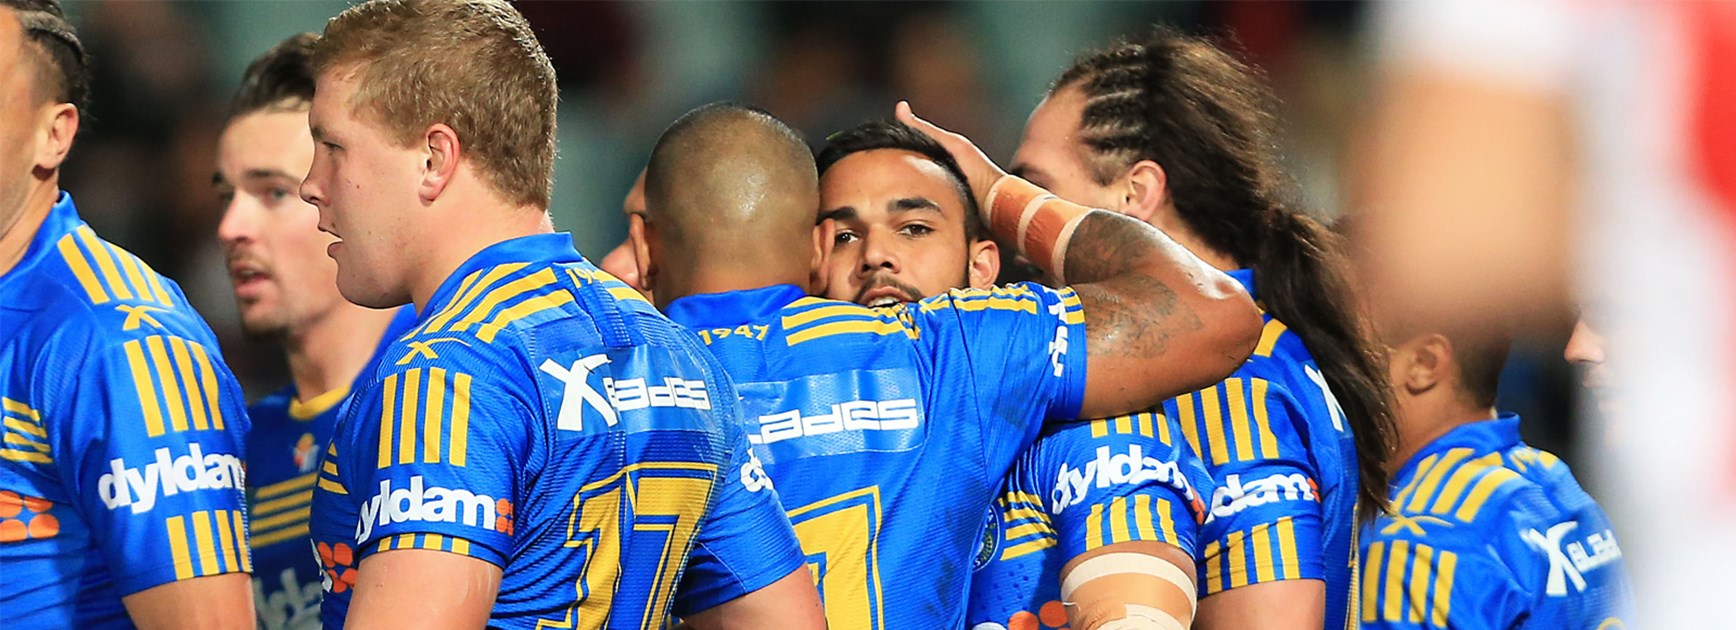 The Eels celebrate Bevan French's opening try against Manly on Friday.